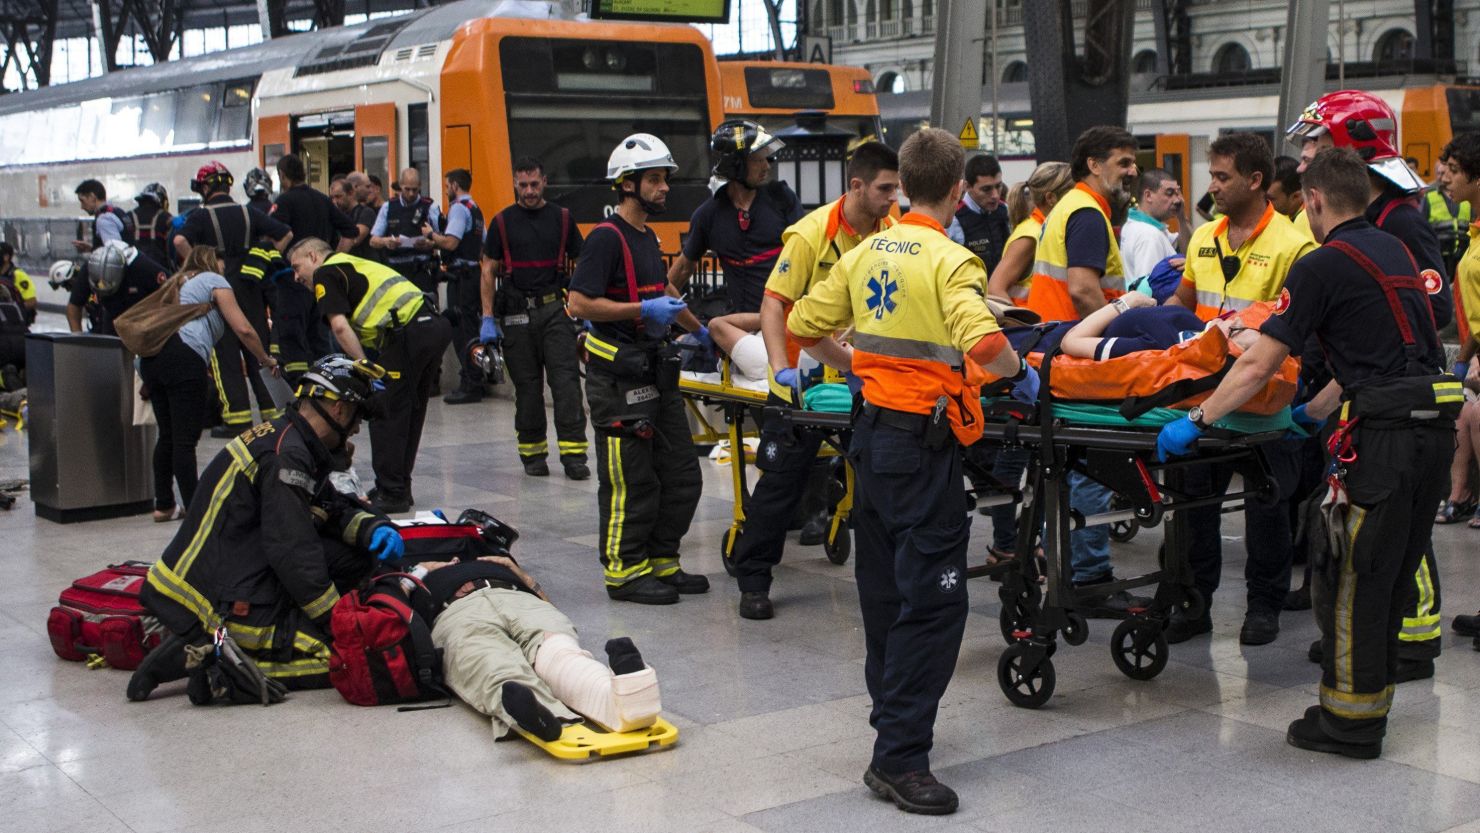 Spanish firefighters and paramedics treat injured people.